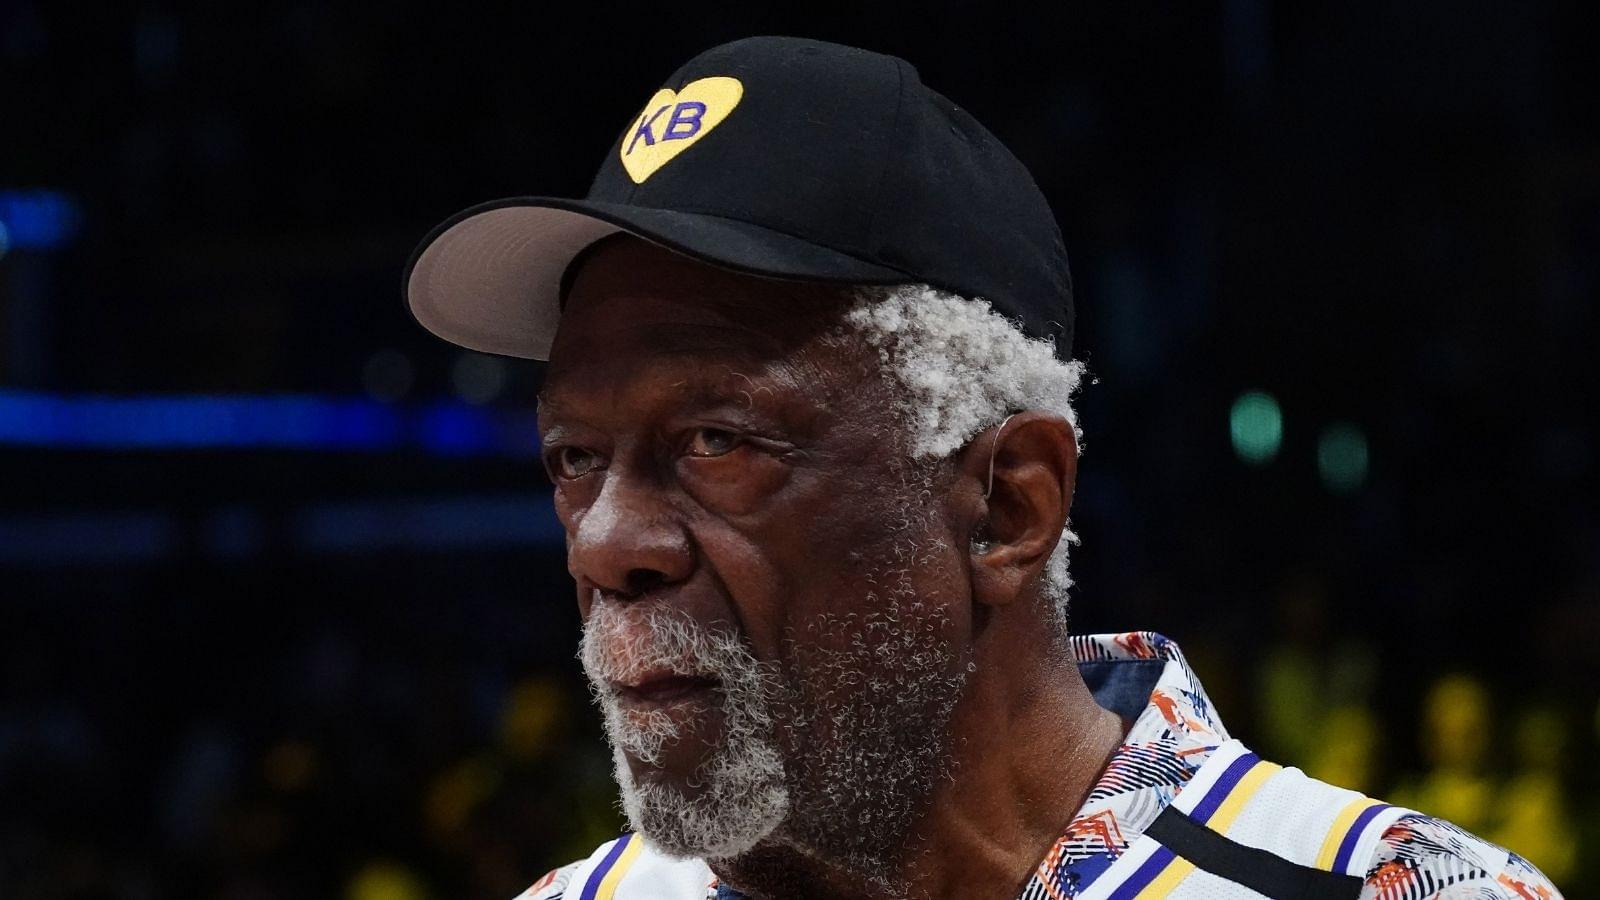 "There is no Michael Jordan or LeBron James or Kobe Bryant without Bill Russell”: Former Bulls point guard and MJ's teammate discusses the Celtics legend's importance